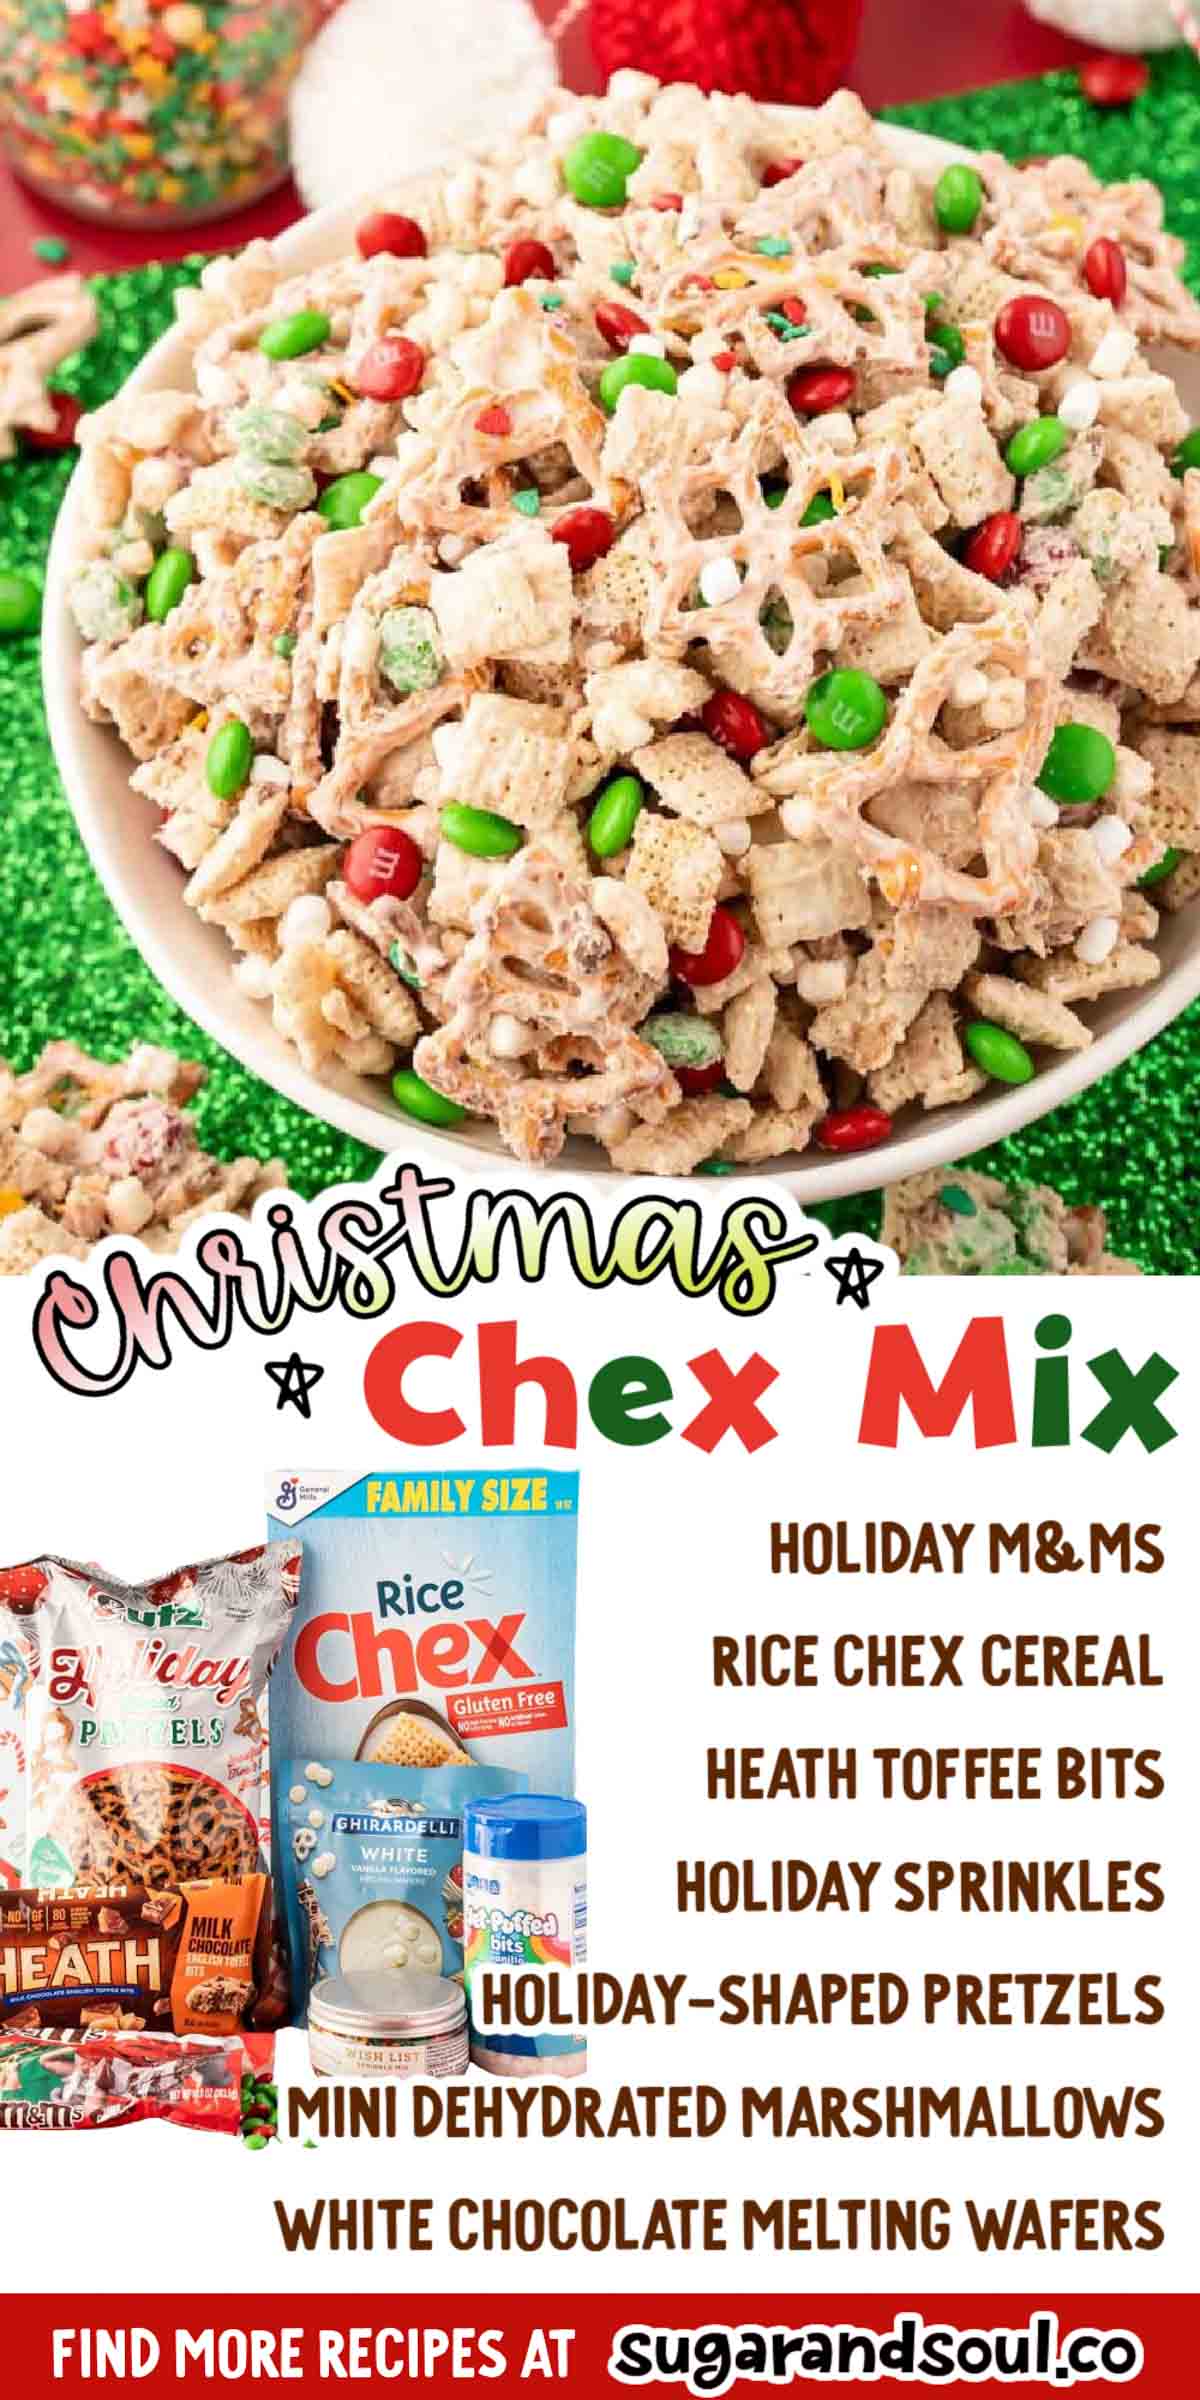 Christmas Chex Mix coats Chex cereal and holiday-shaped pretzels with melted white chocolate before adding in candy and marshmallows! A delicious snack that everyone will love all season long! via @sugarandsoulco